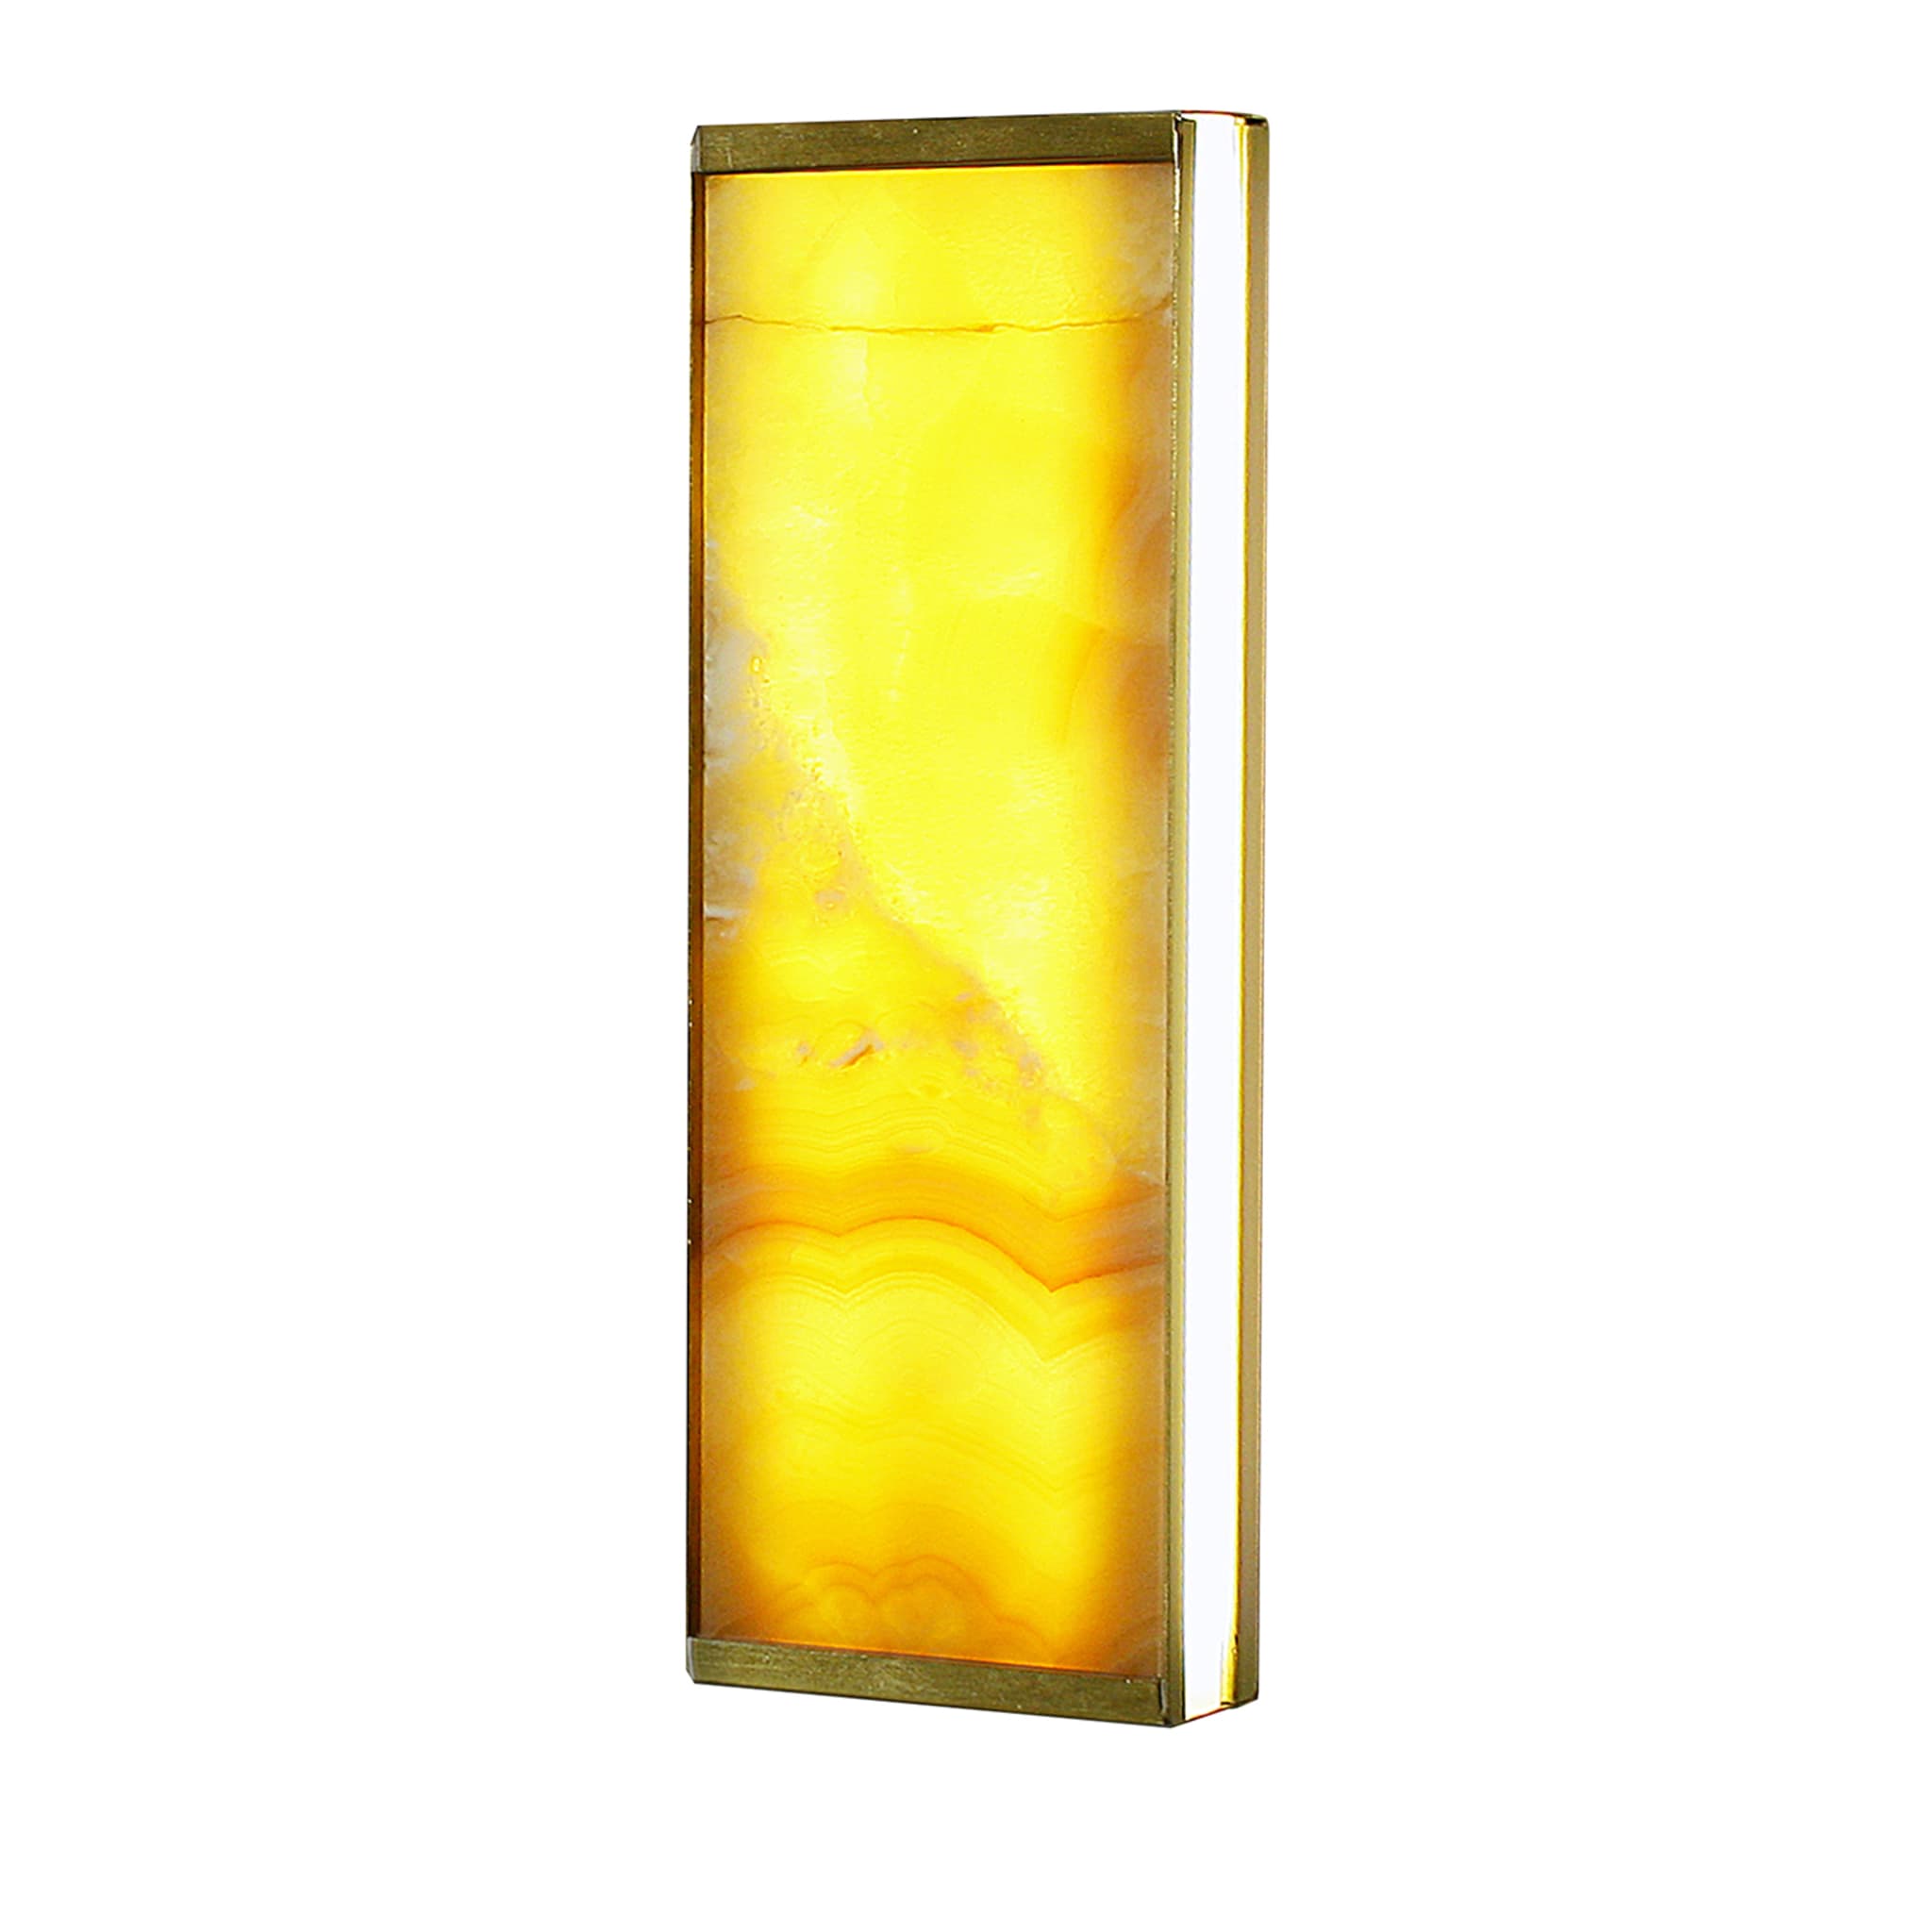 "Tech short" Wall Sconce in Yellow Onyx and Satin Brass - Main view